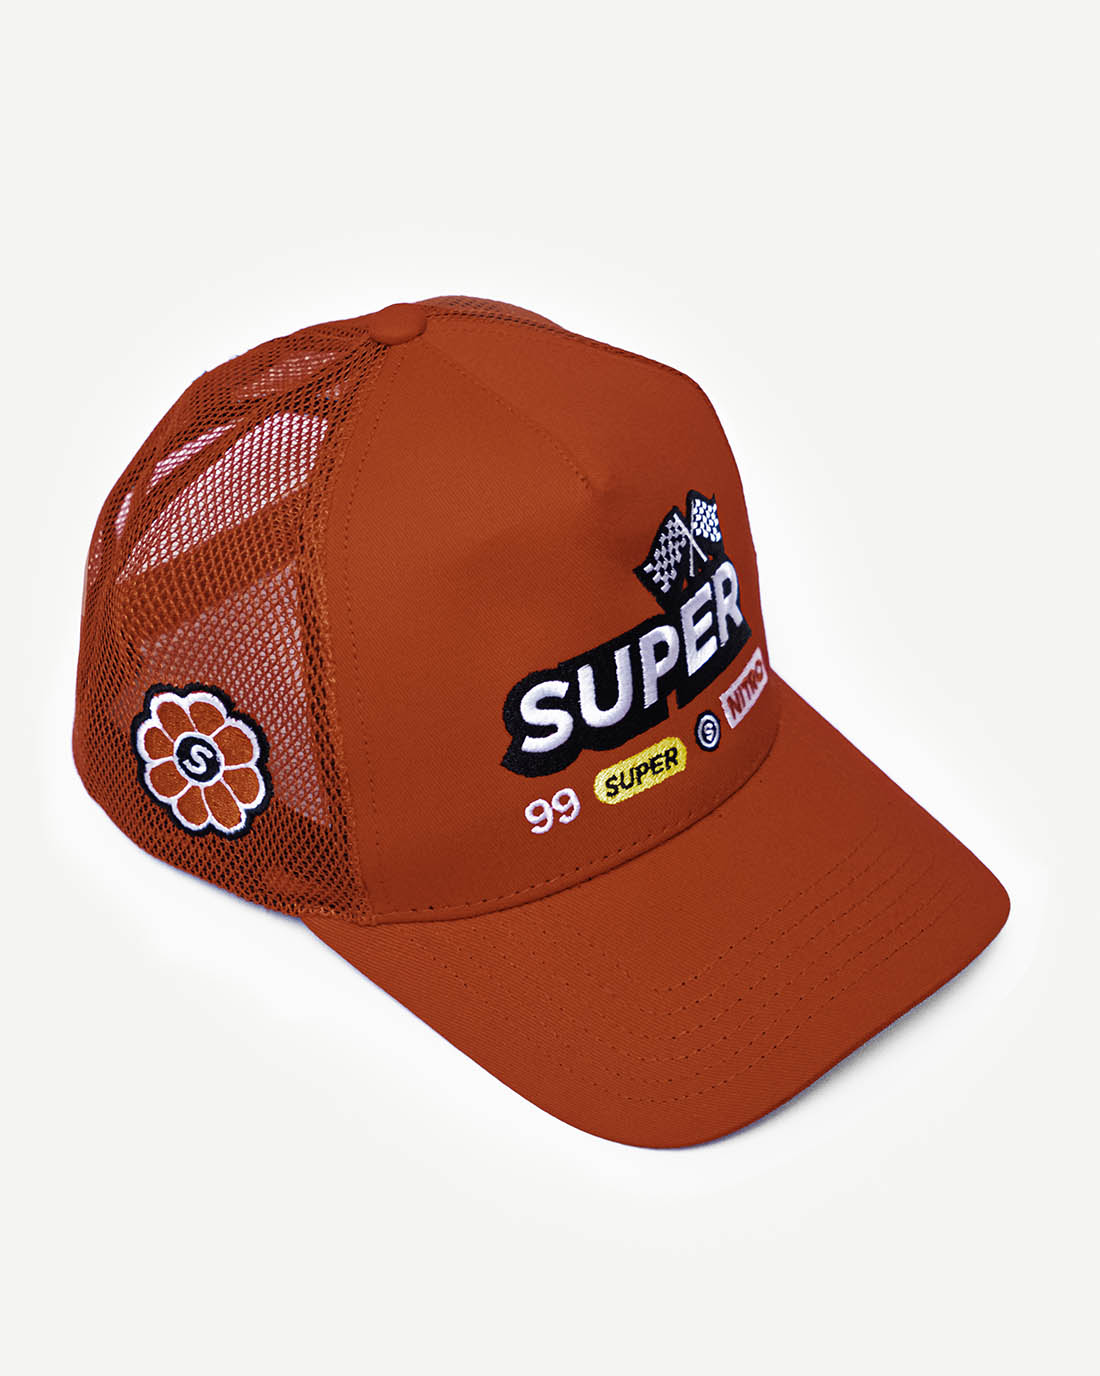 Front side view of a vibrant red snapback hat with stylish racing-inspired embroidered design and cooling mesh back.